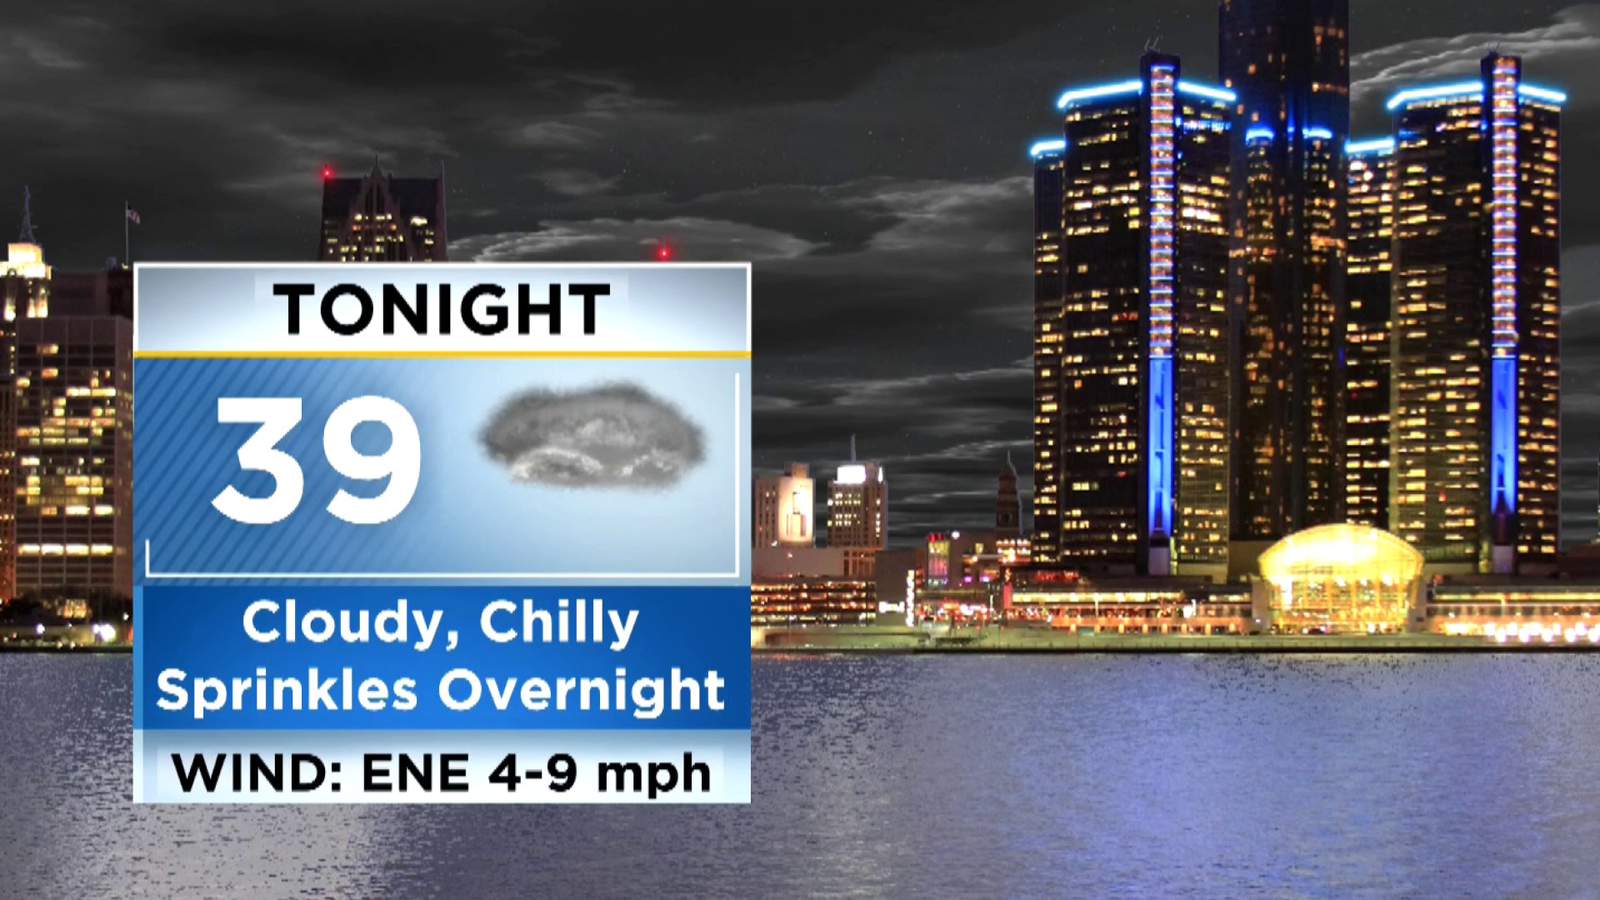 Metro Detroit weather: Cloudy, chilly Sunday night but not too chilly